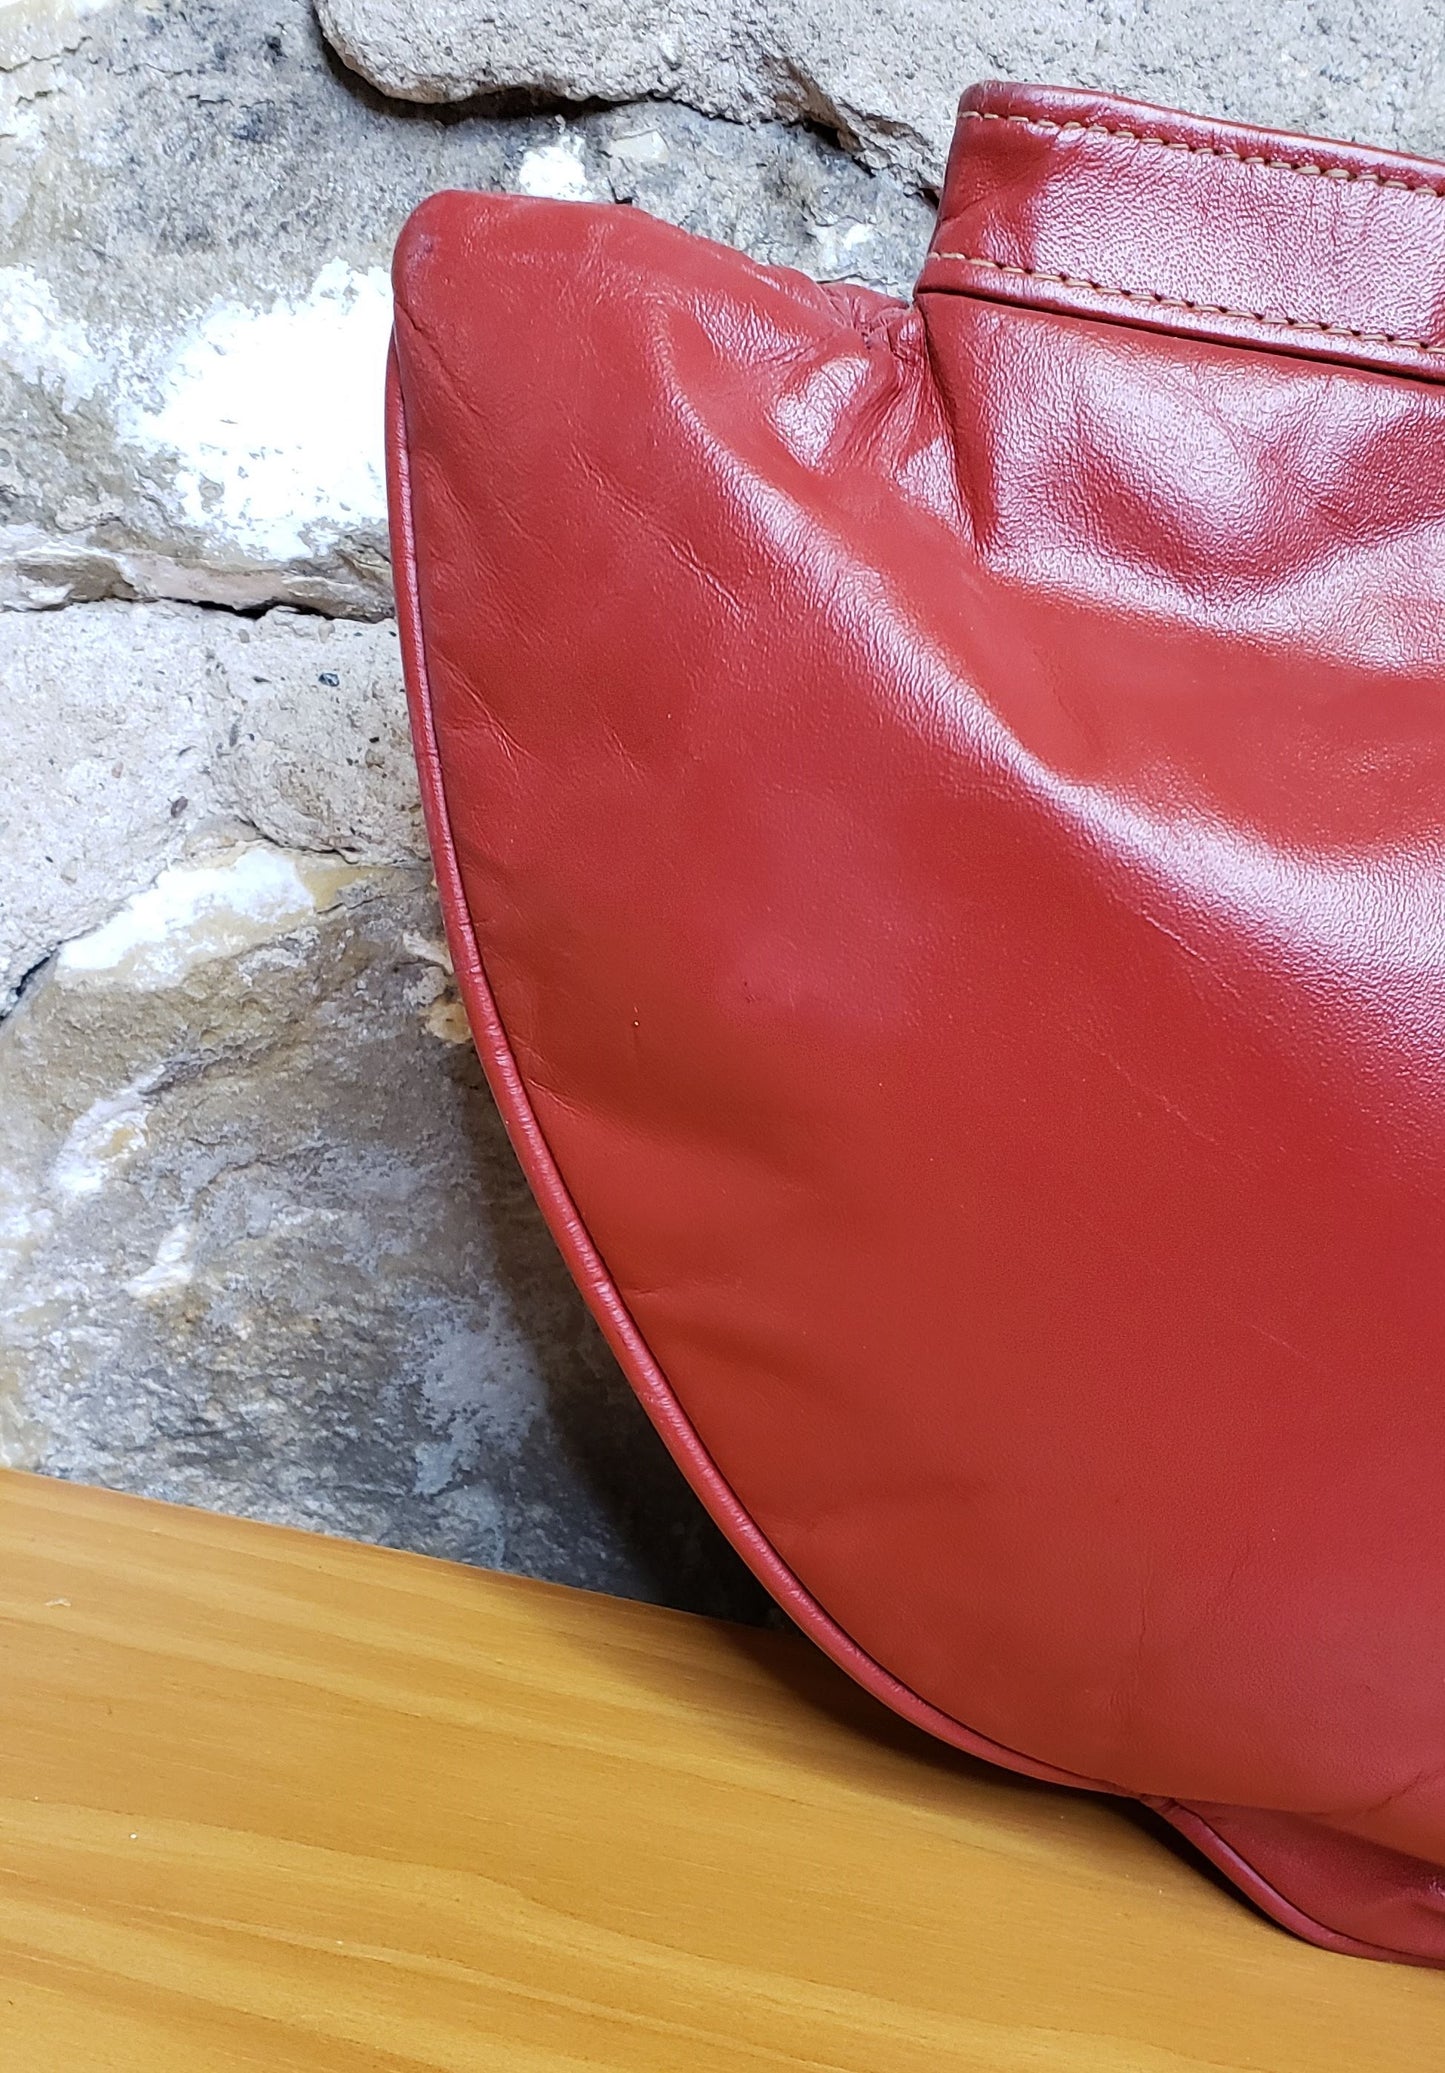 Vintage Red Leather Purse